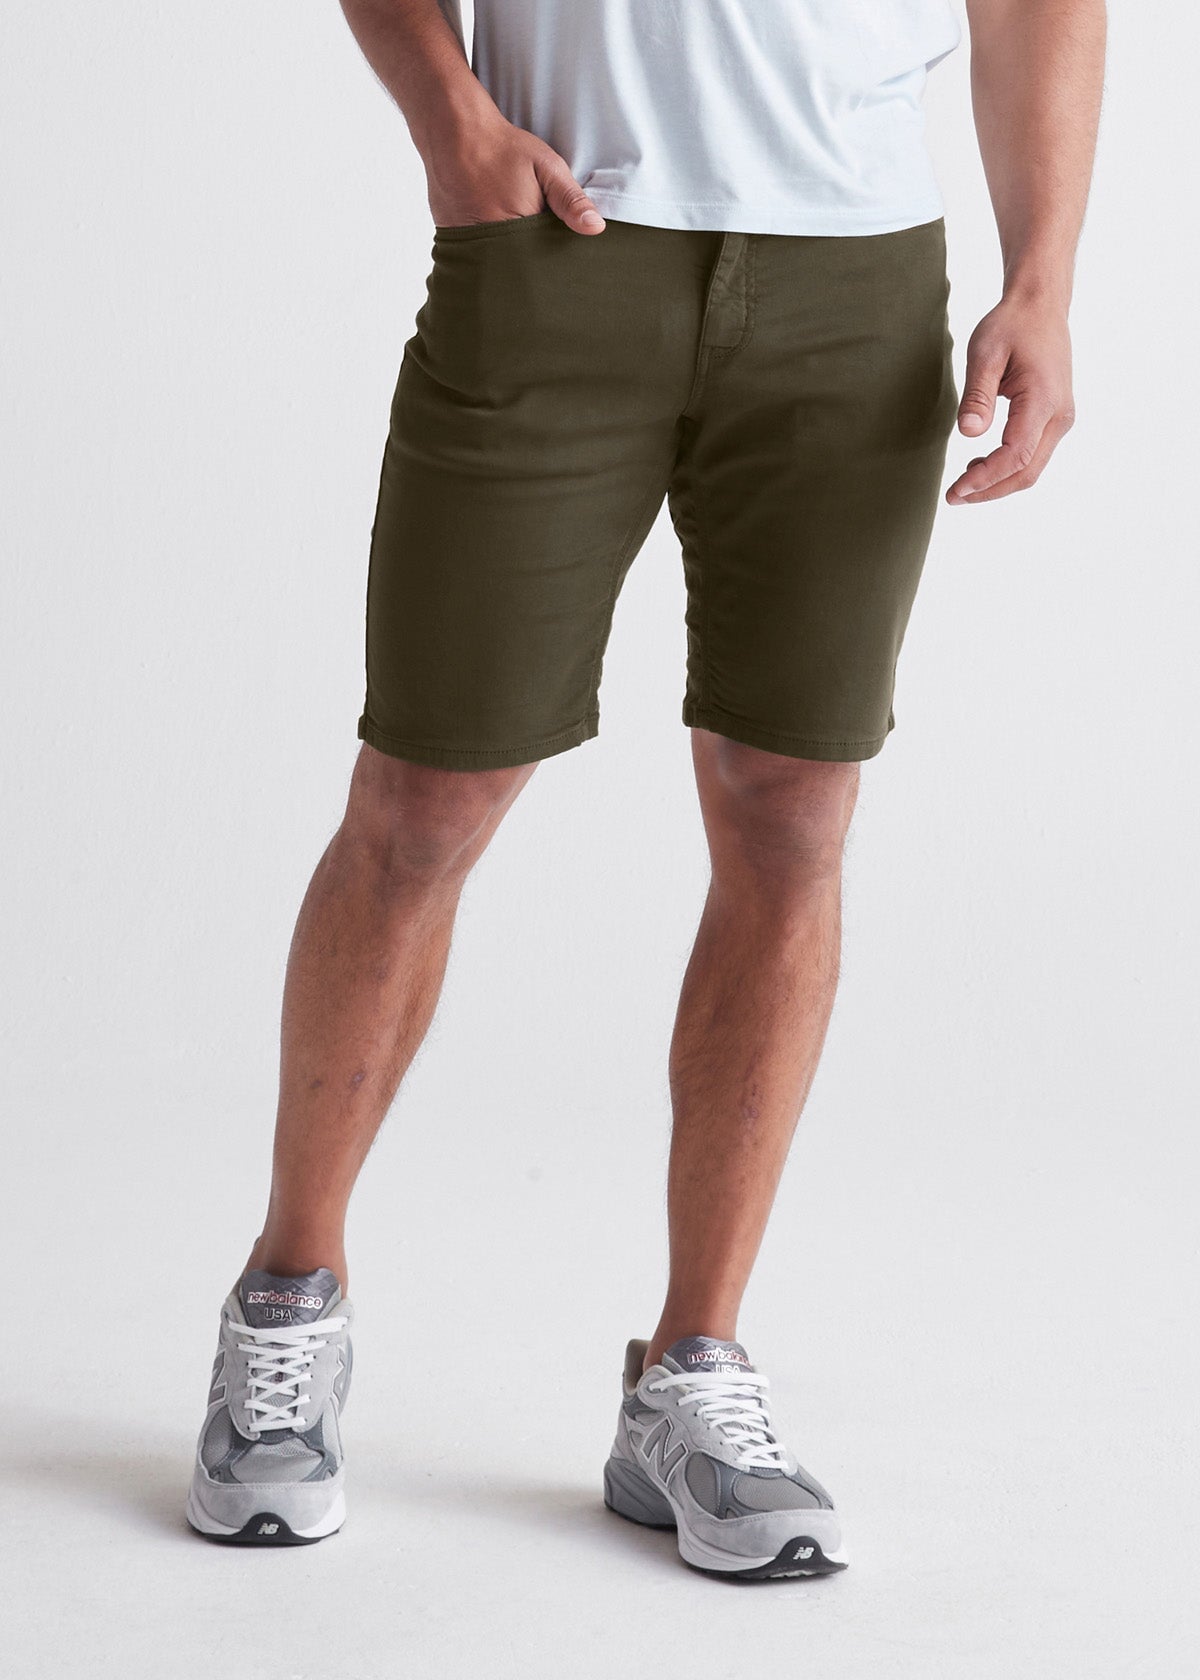 Performance Short Men\'s Green Relaxed Fit Army